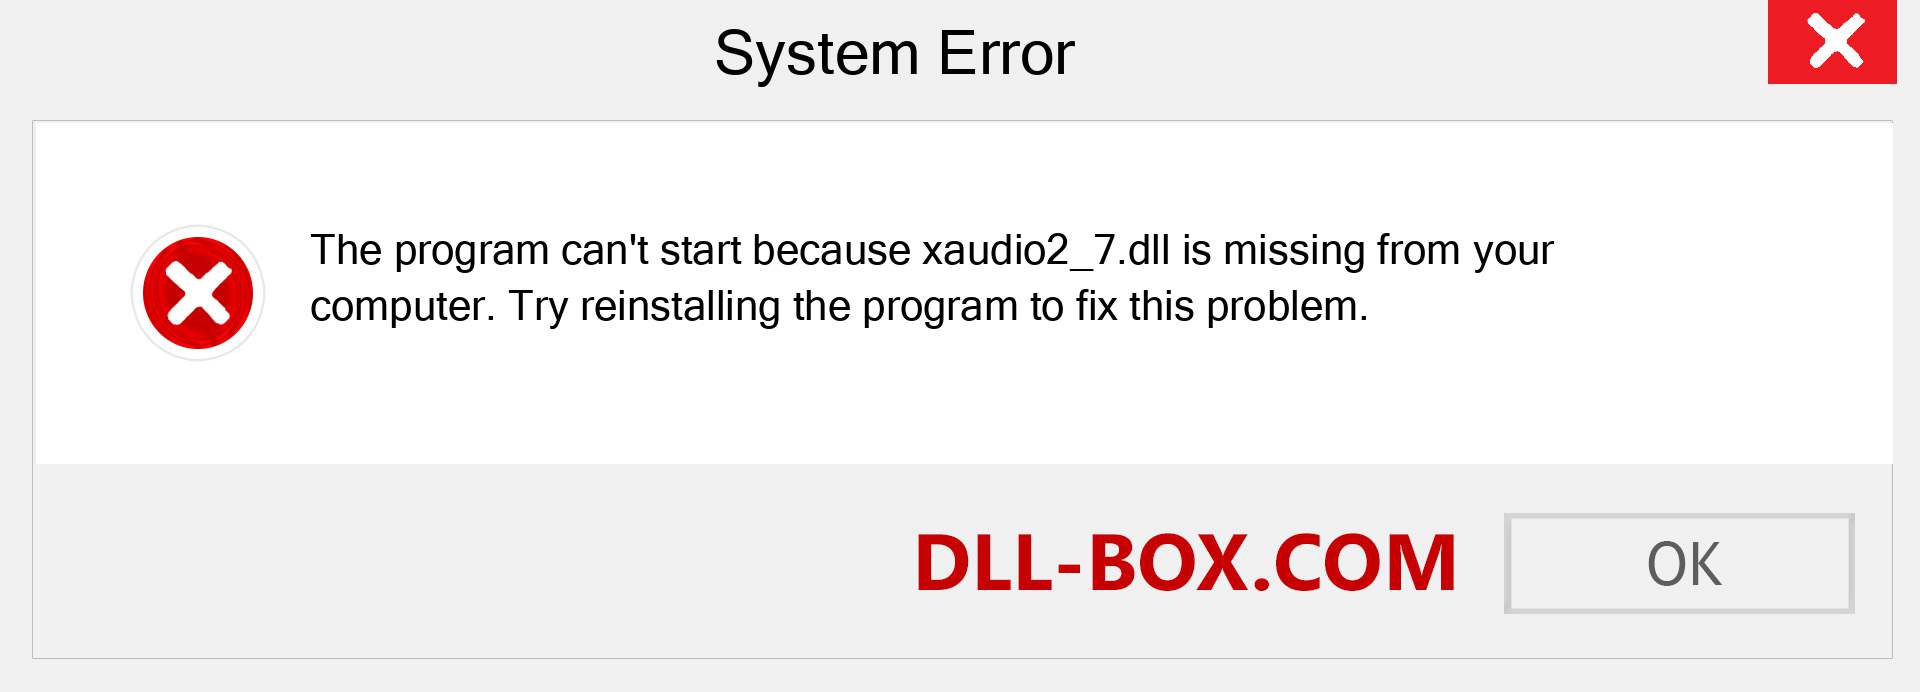  xaudio2_7.dll file is missing?. Download for Windows 7, 8, 10 - Fix  xaudio2_7 dll Missing Error on Windows, photos, images